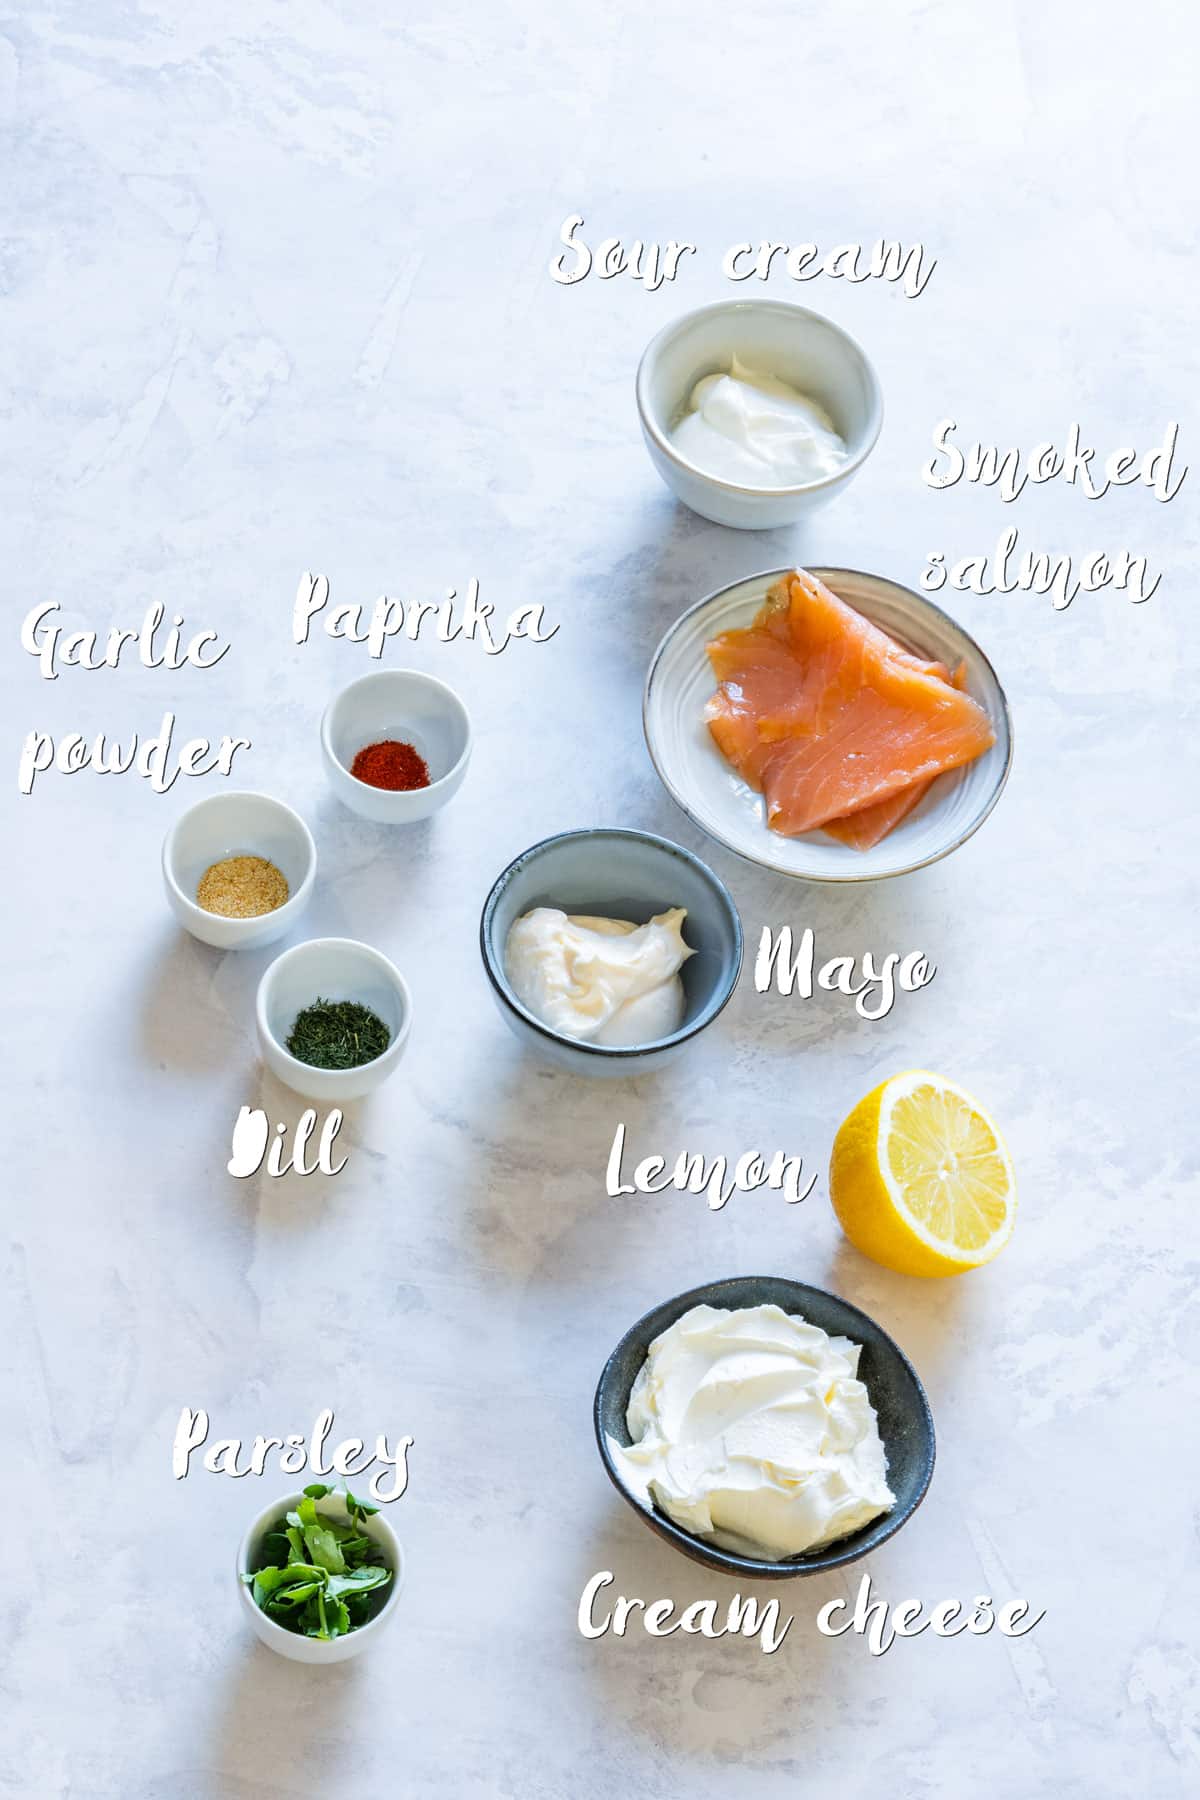 All ingredients of smoked salmon dip on the table.